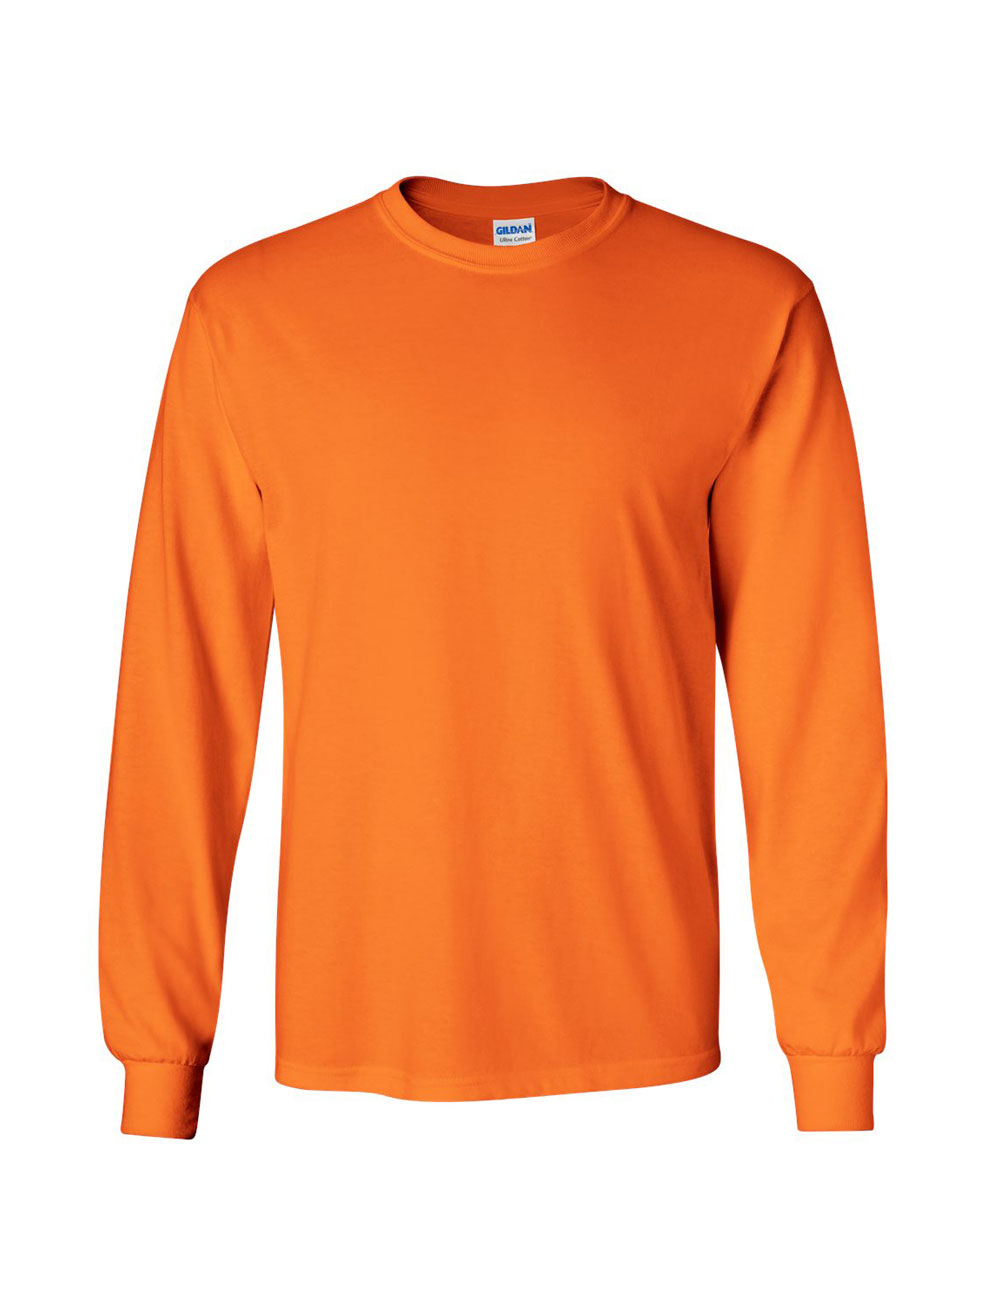 Tag: High visibility T Shirt | Action Safety Apparel